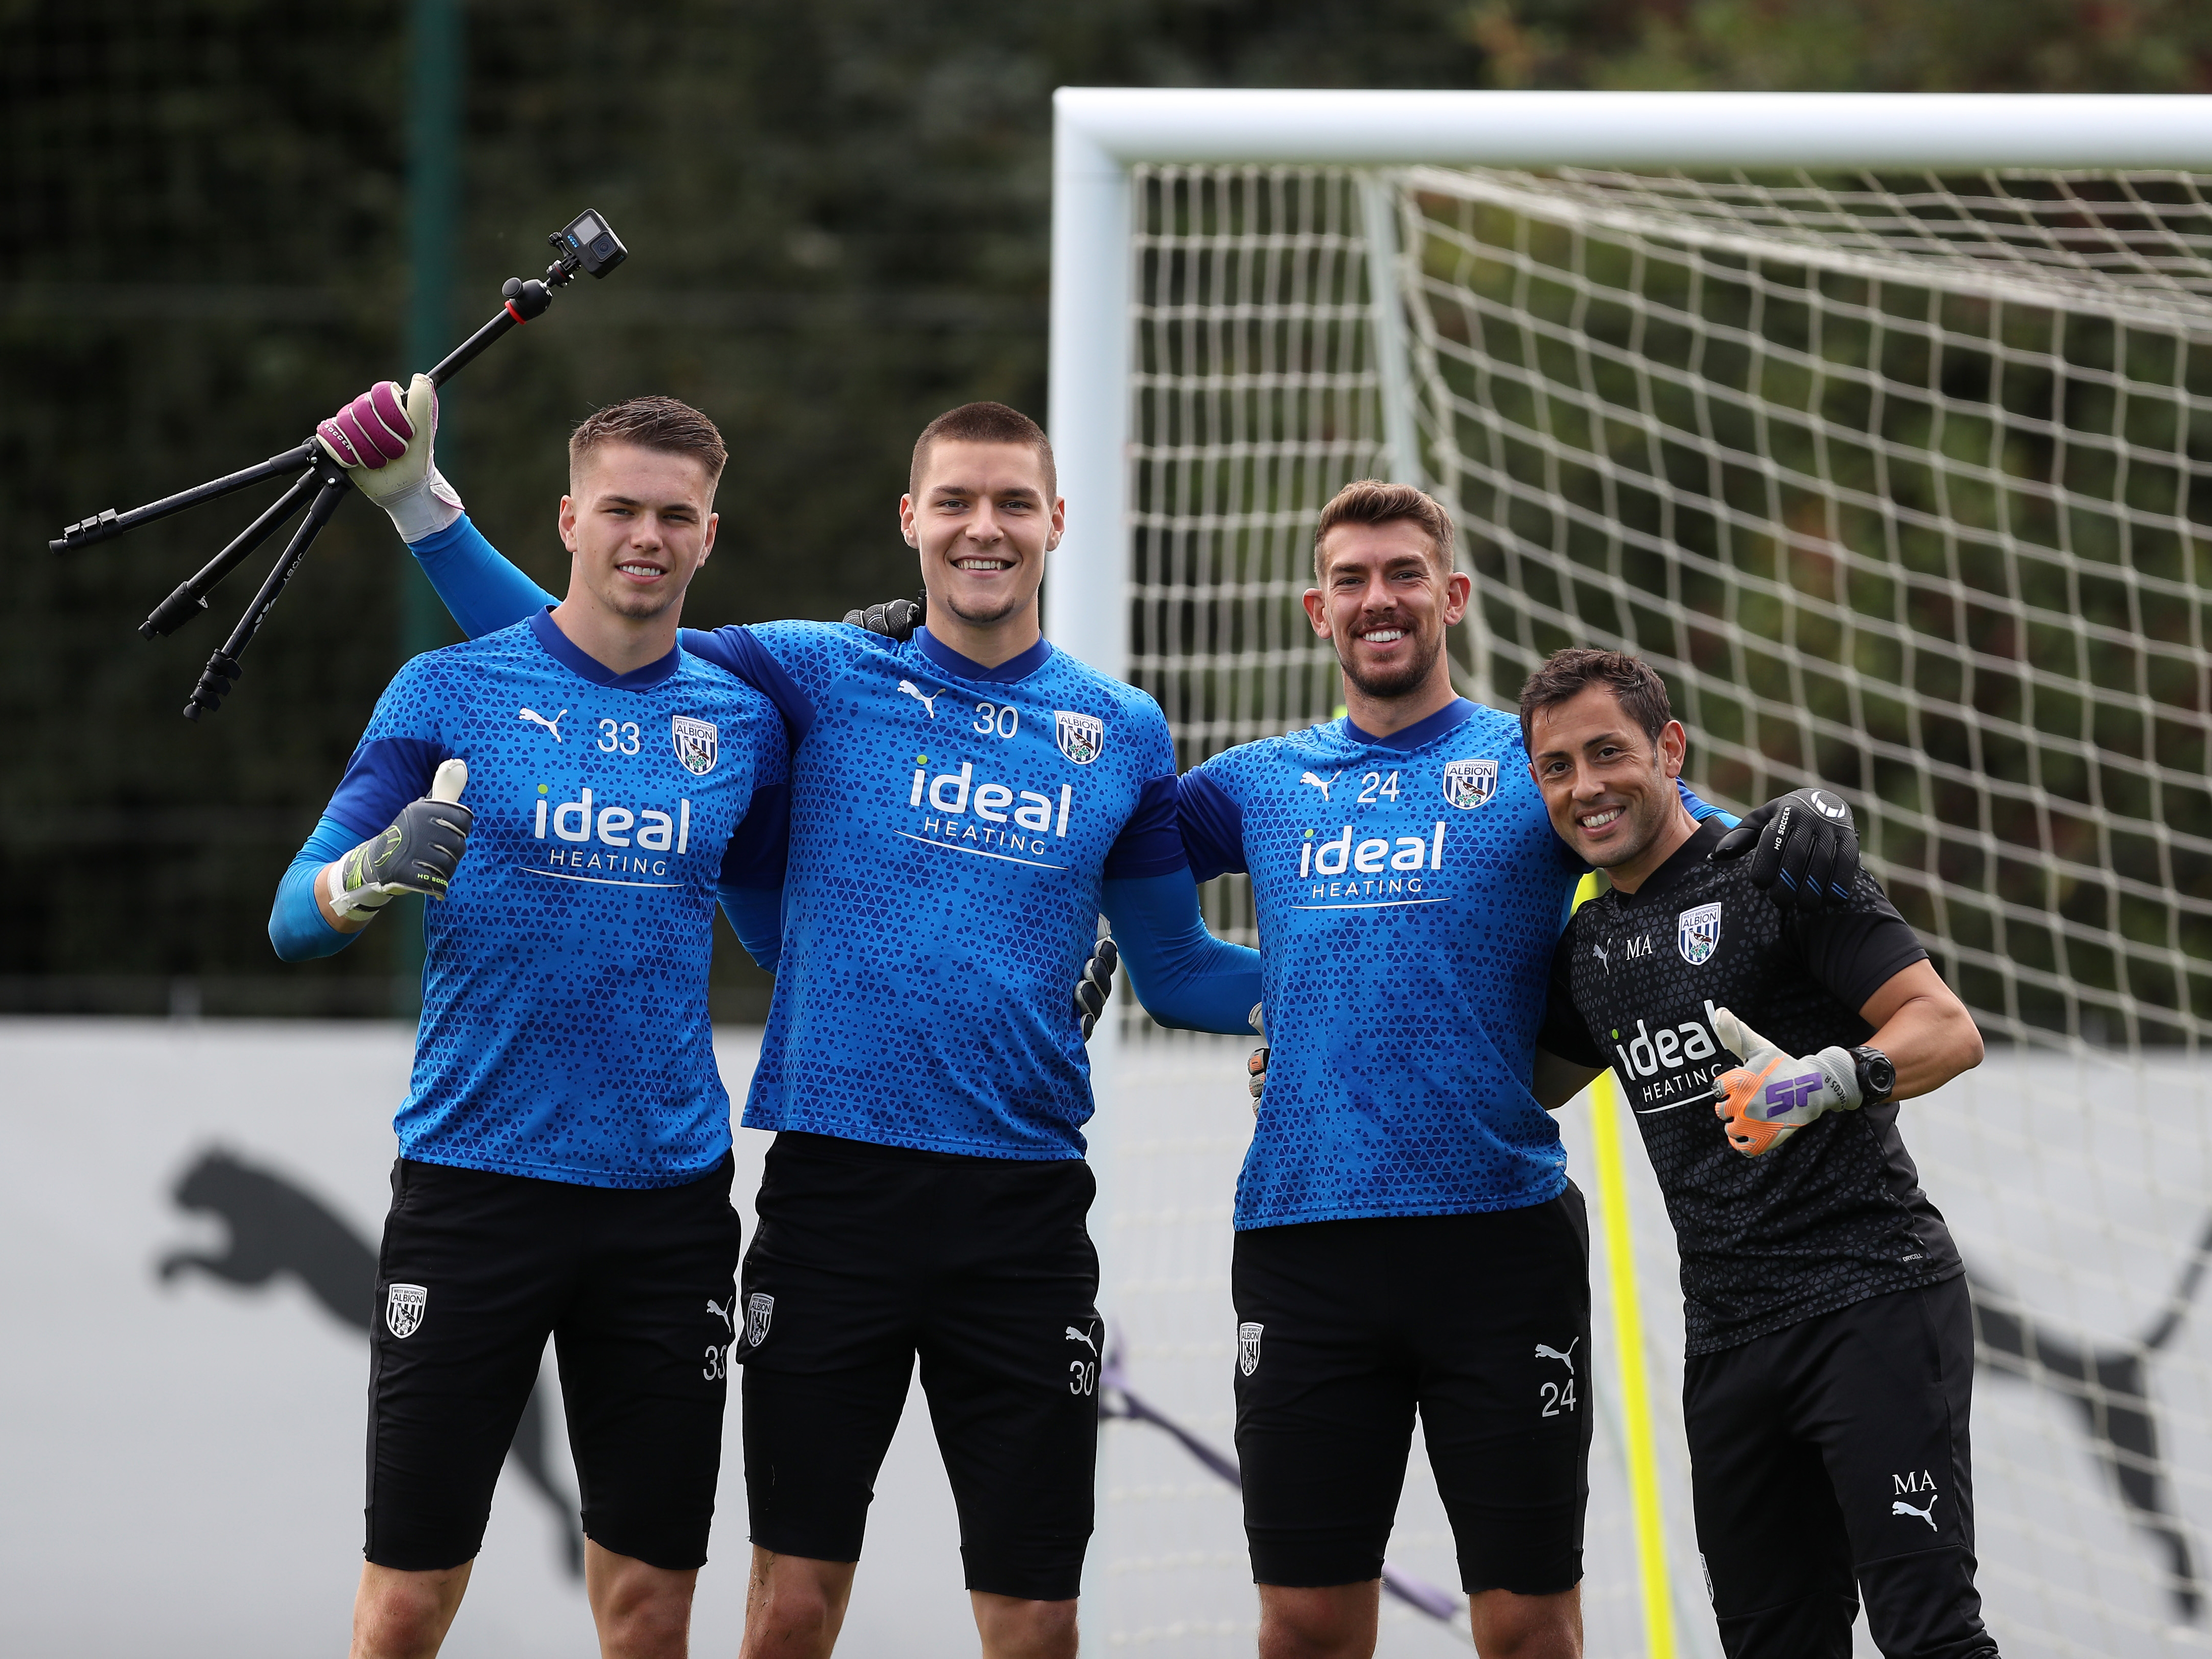 Josh Griffiths, Ted Cann, Alex Palmer and Marcos Abad pose for a photo in training 